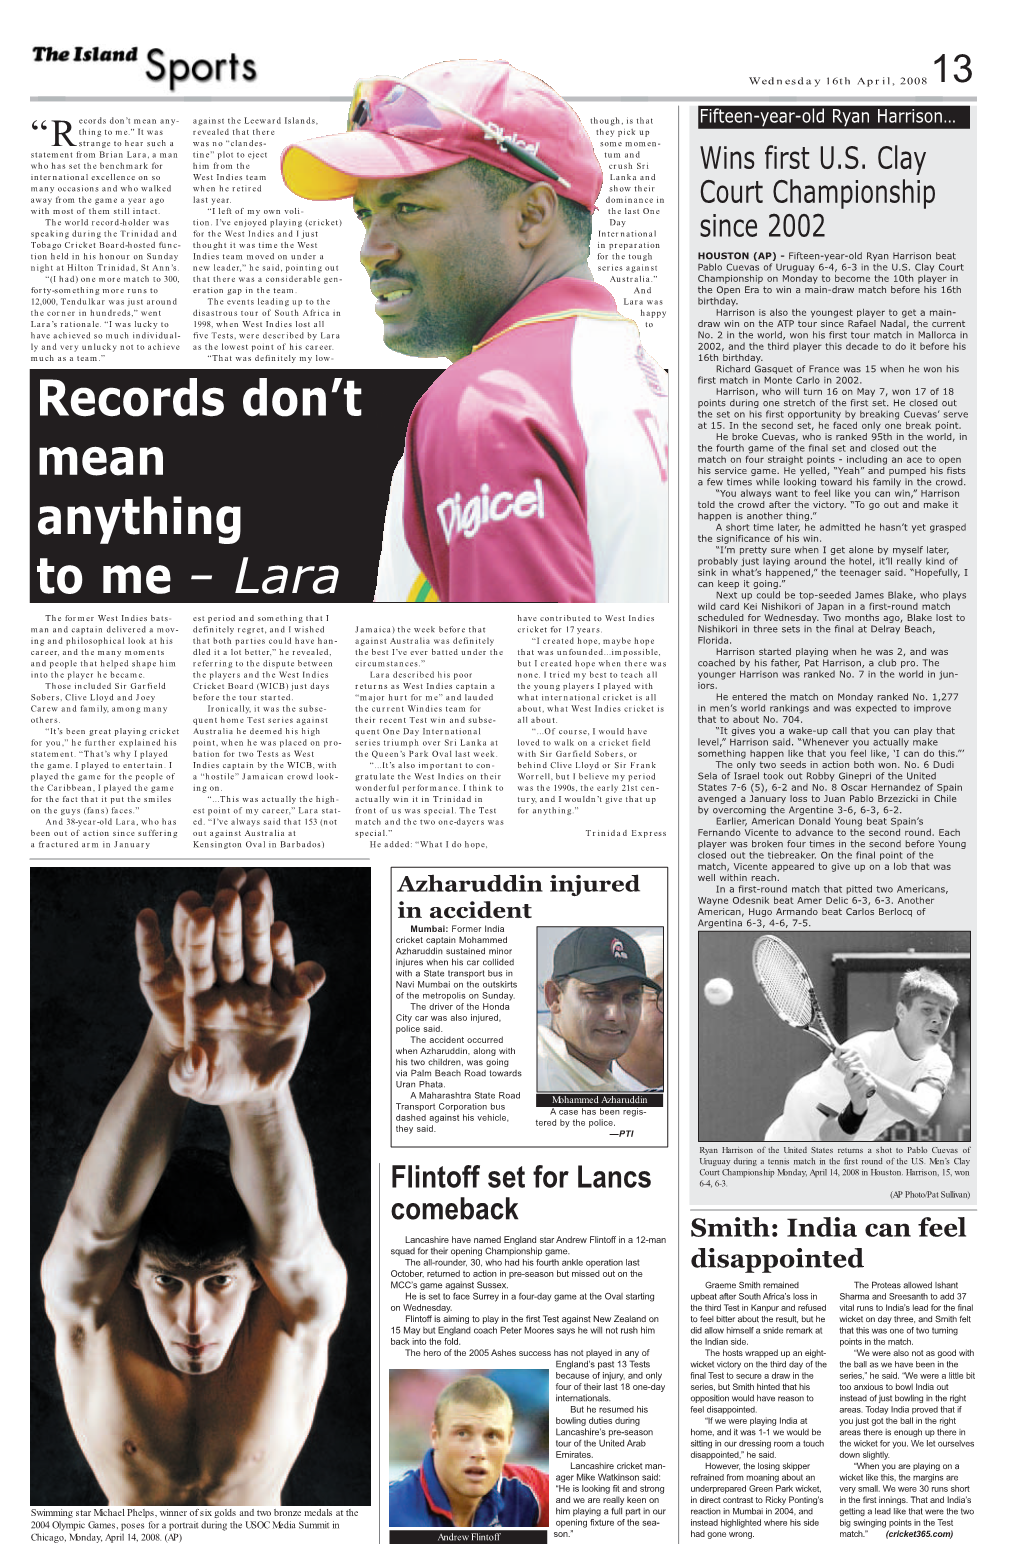 Records Don't Mean Anything to Me – Lara